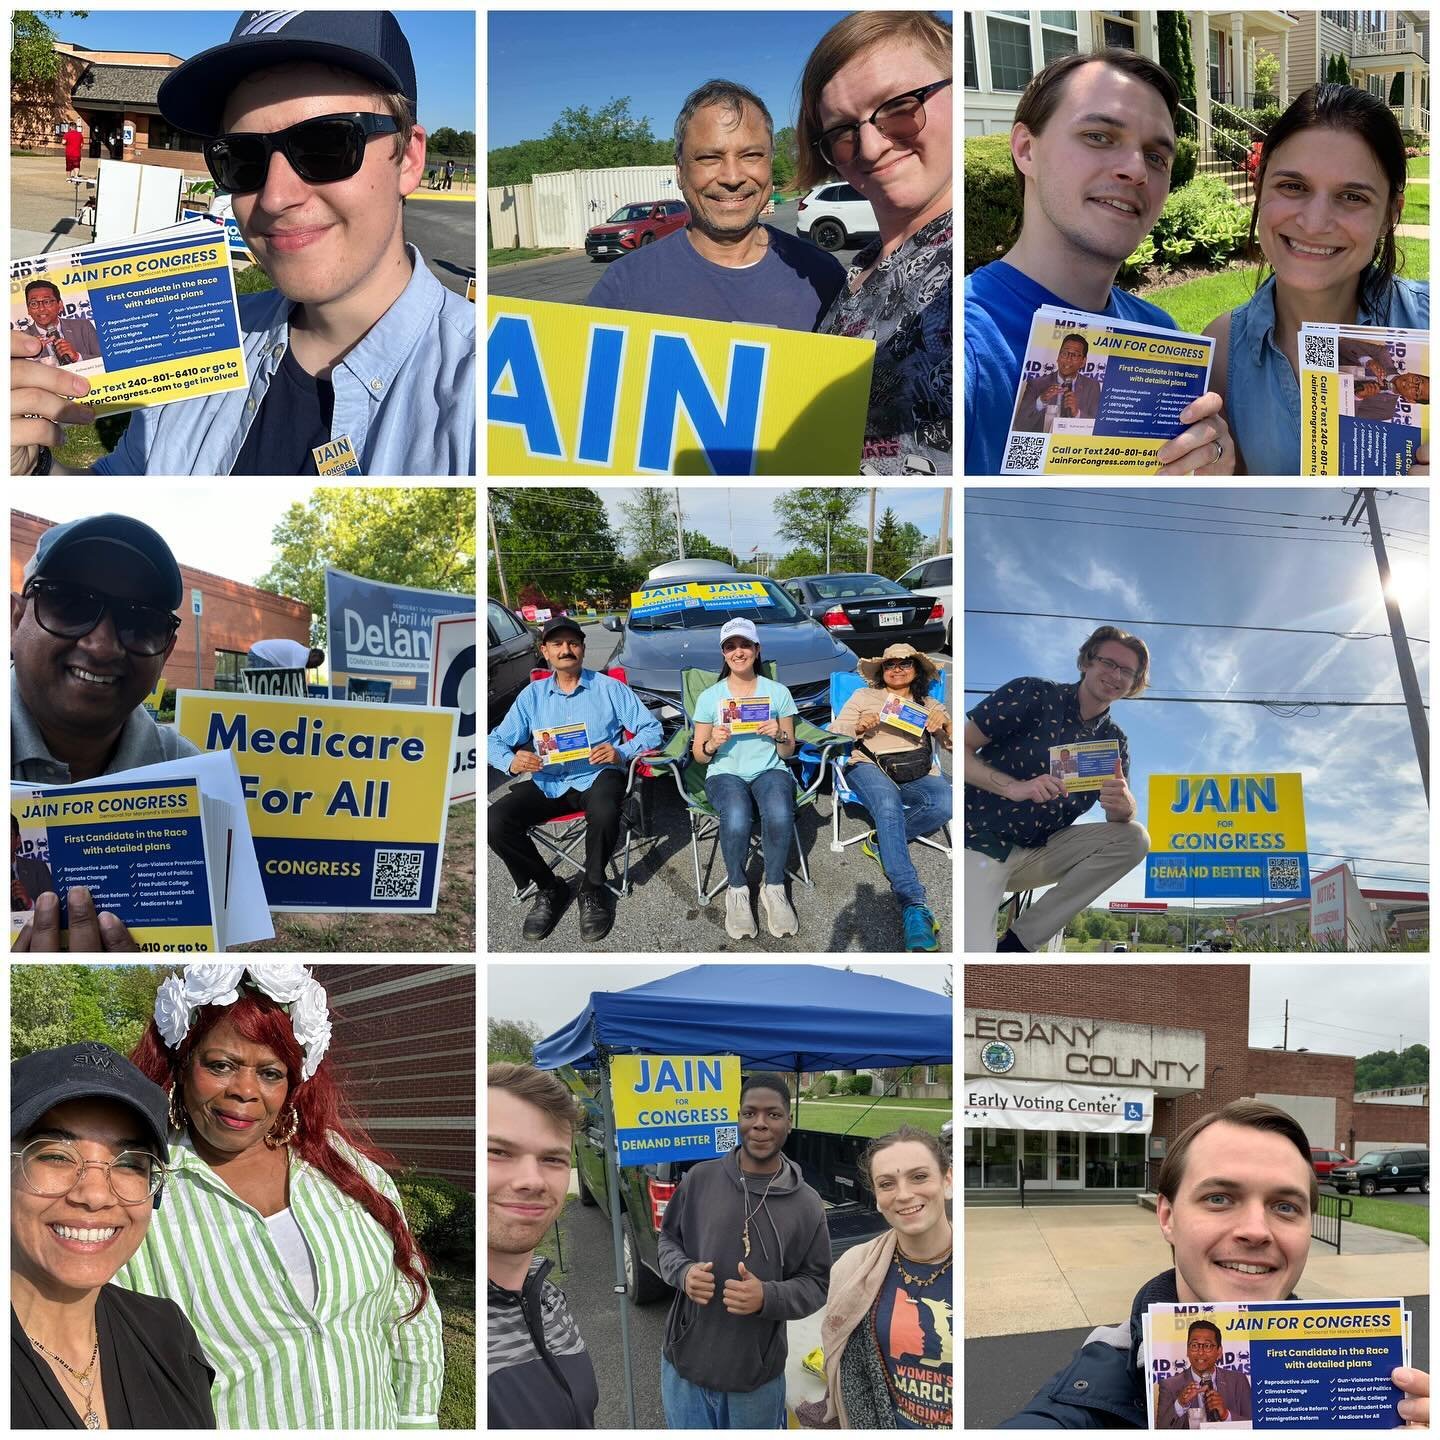 ➡️ From Oakland to Gaithersburg, our volunteers have staffed every Early Voting location daily &amp; knocked on thousands of doors - all while focusing on issues &amp; without attacking other candidates. That&rsquo;s how we win! #DemandBetter